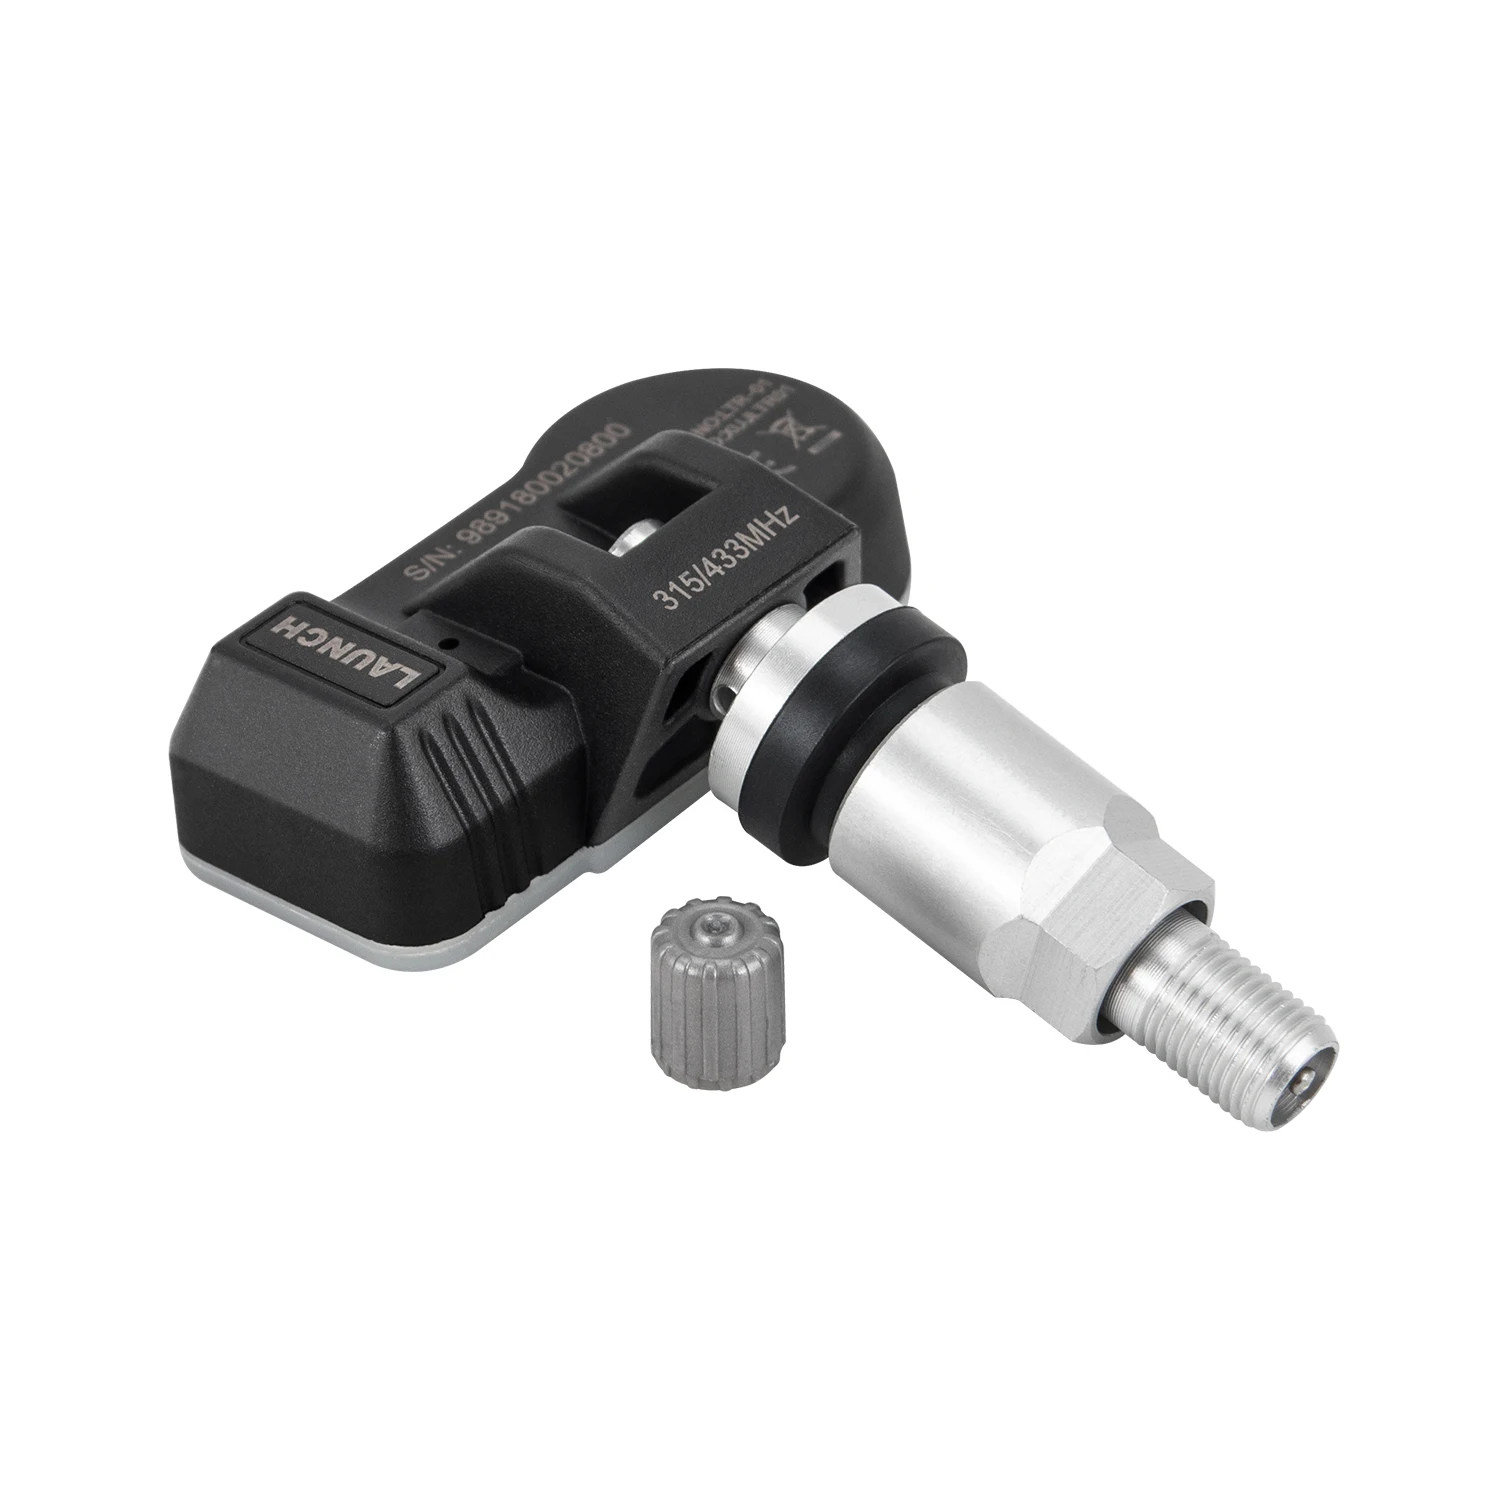 

Launch LTR-03 New Wireless 315mhz/433mhz 2-in-1 Tires Pressure Sensor With Aluminum Alloy TPMS